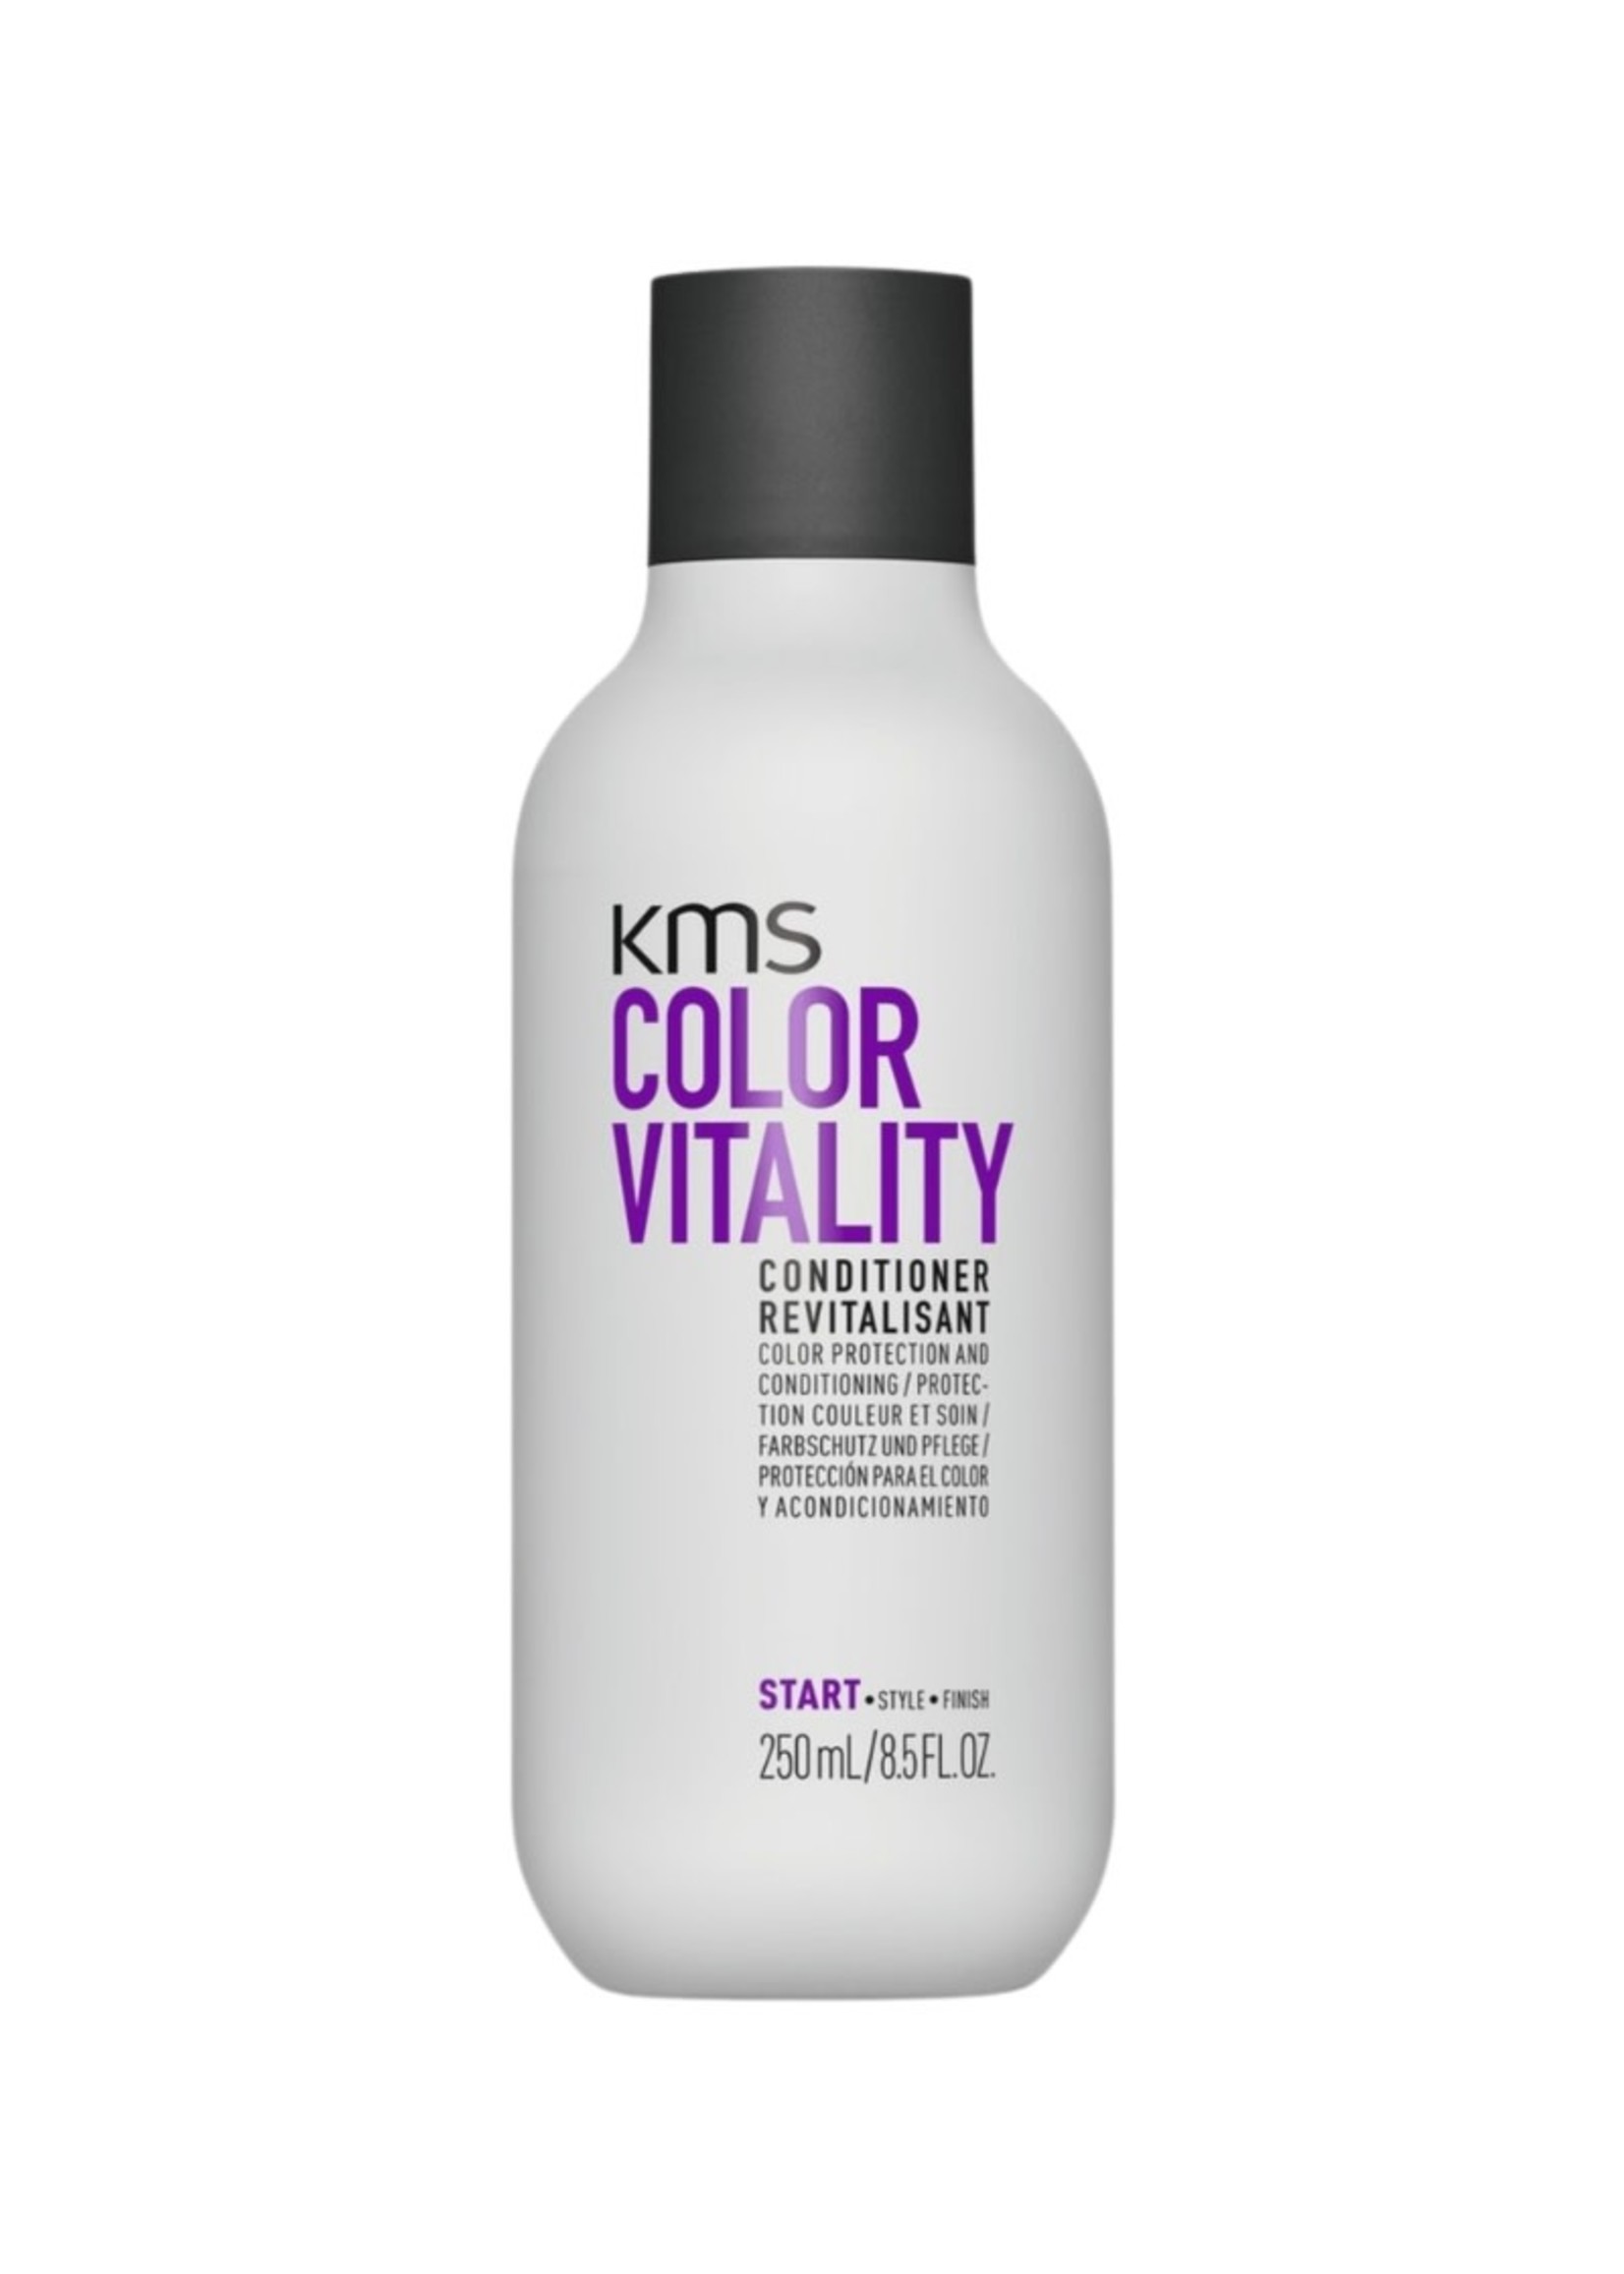 KMS KMS Colorvitality Conditioner 250ml